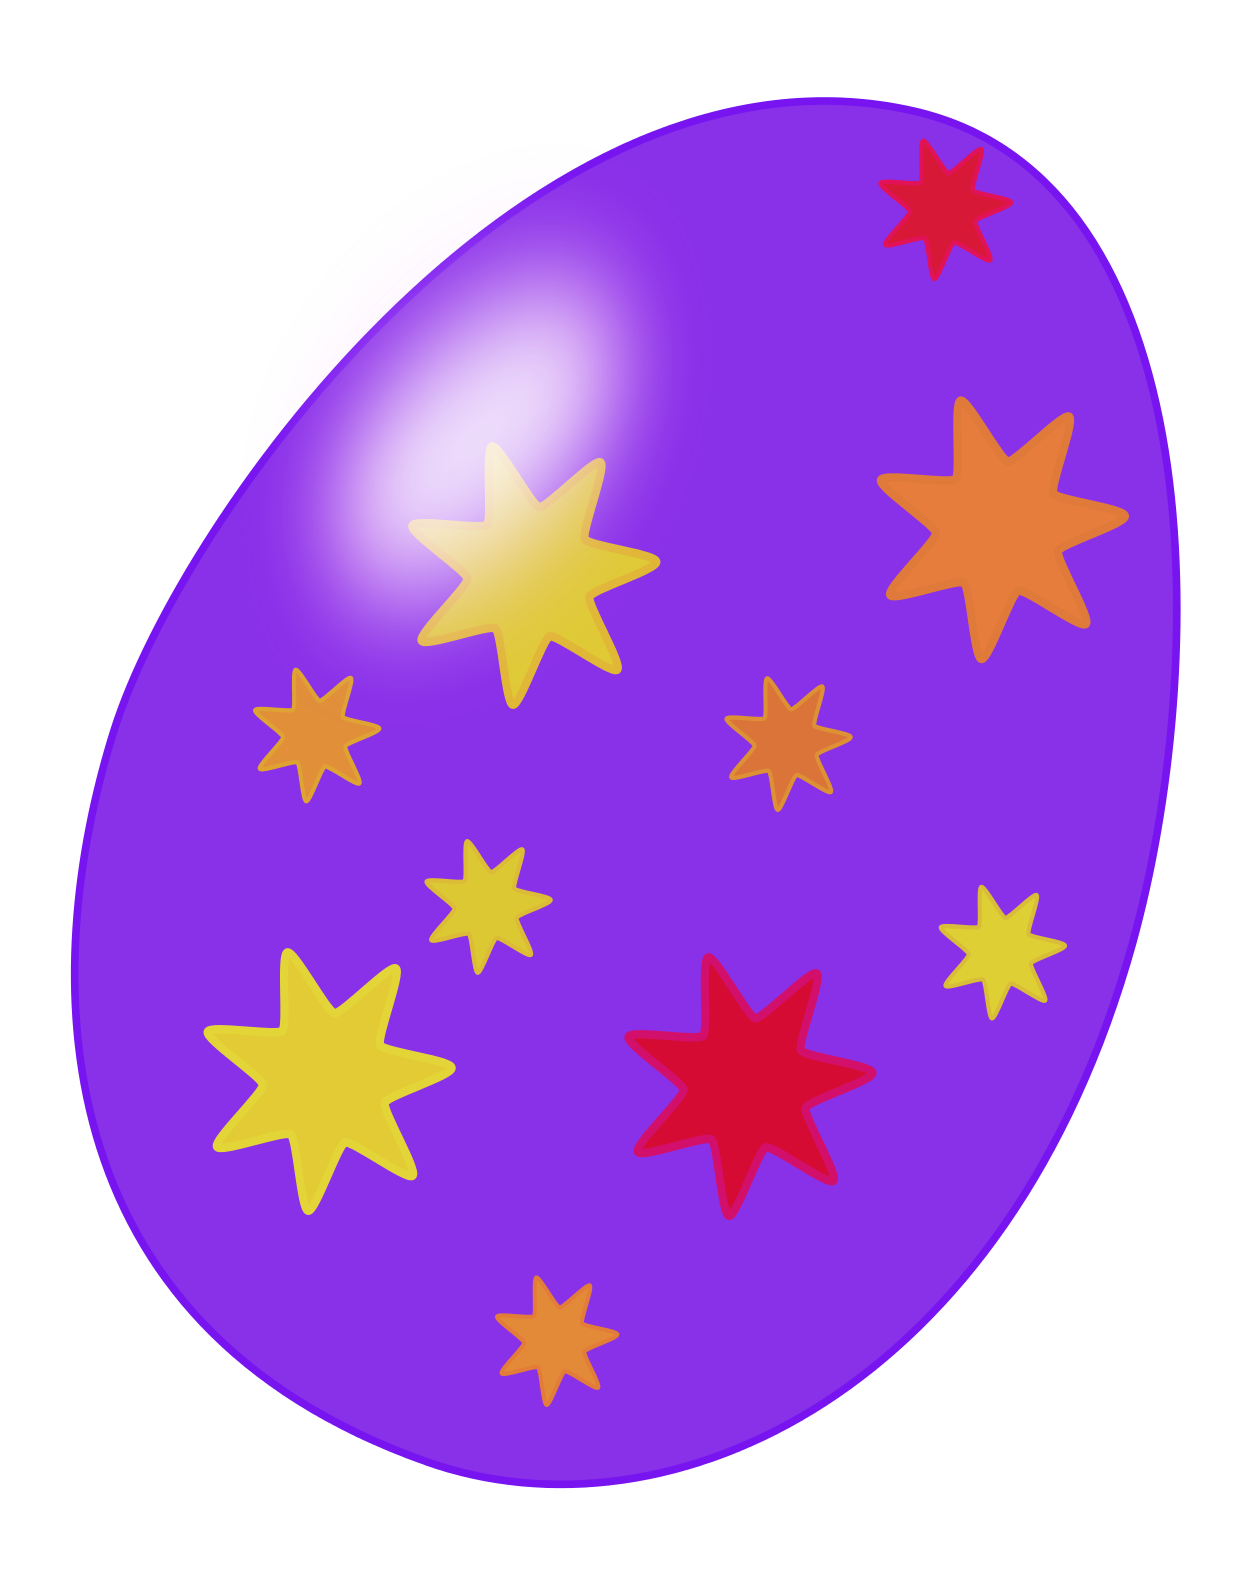 Easter Eggs Clip Art   Images   Free For Commercial Use